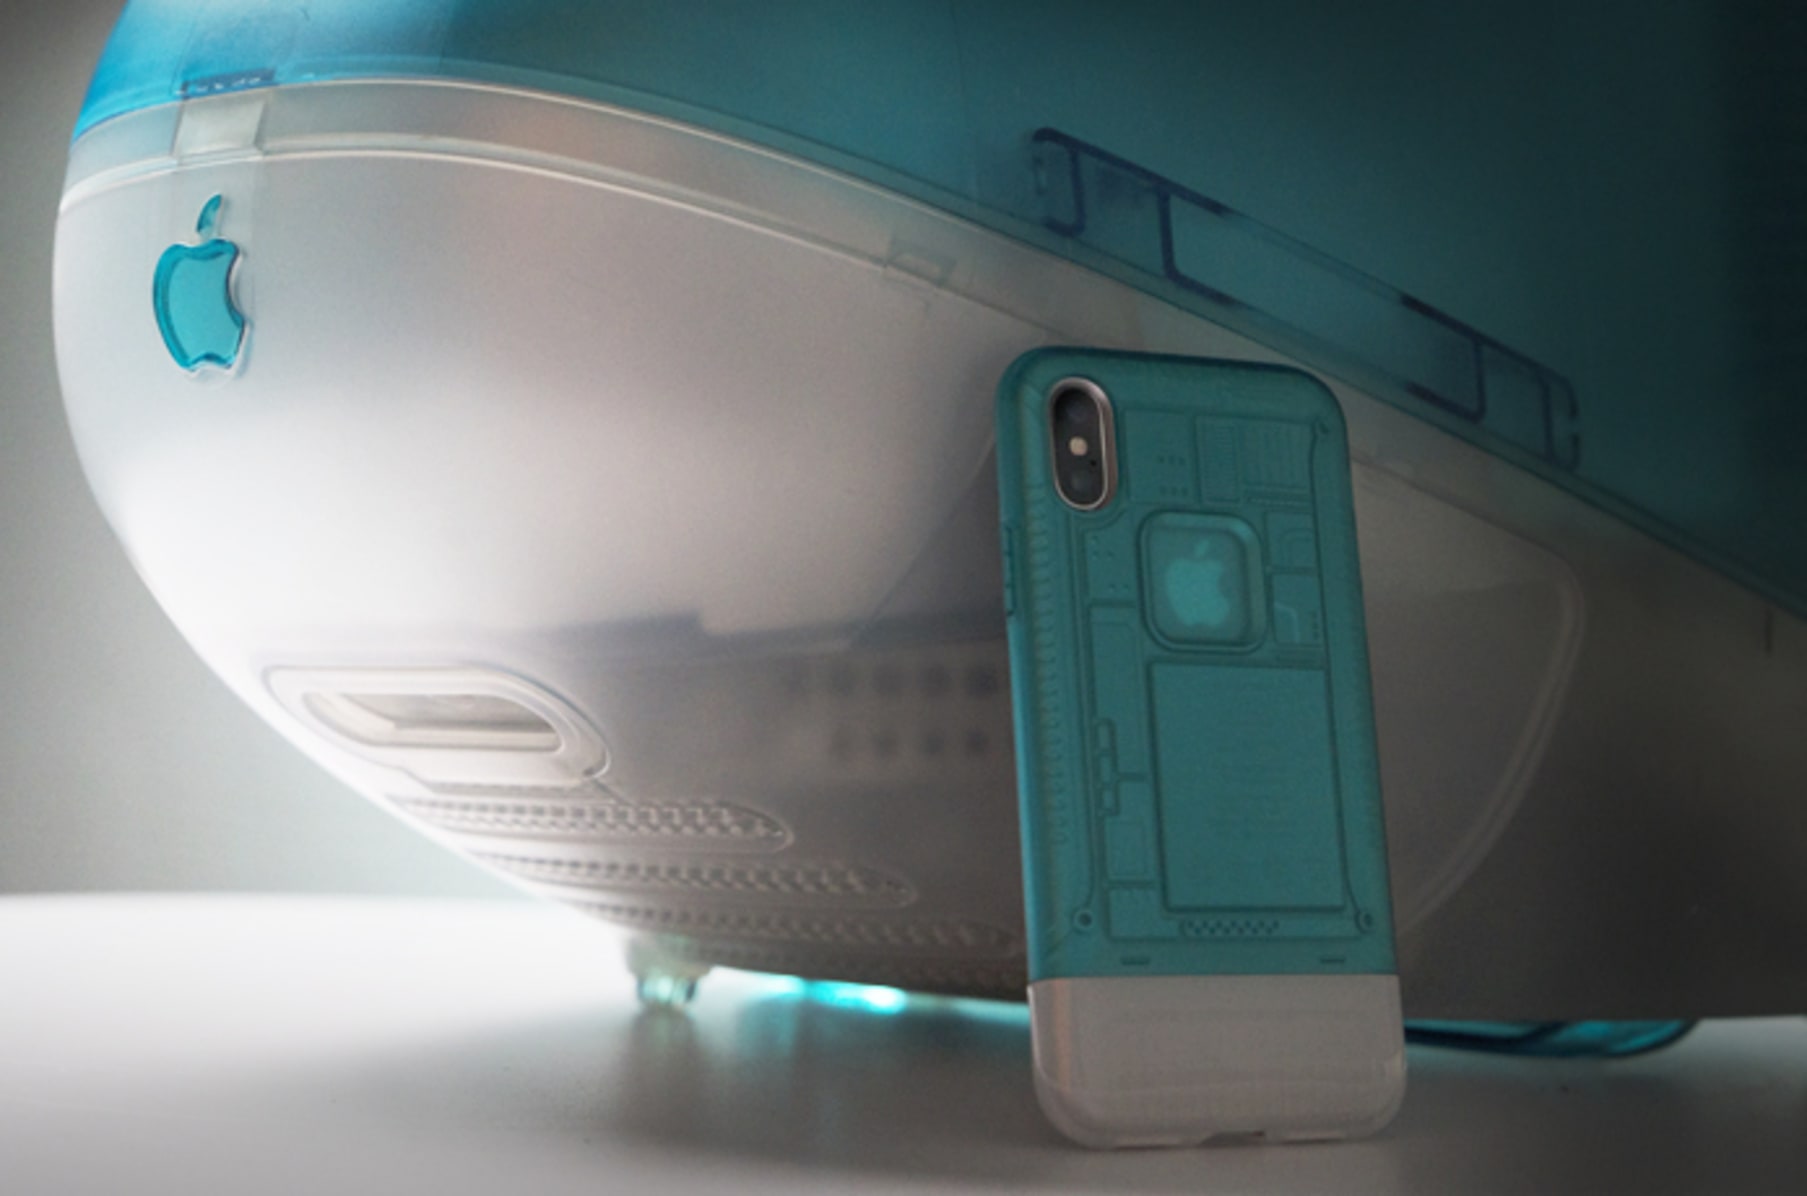 New iMac G3 iPhone 15 cases debut today from Spigen [Deal]